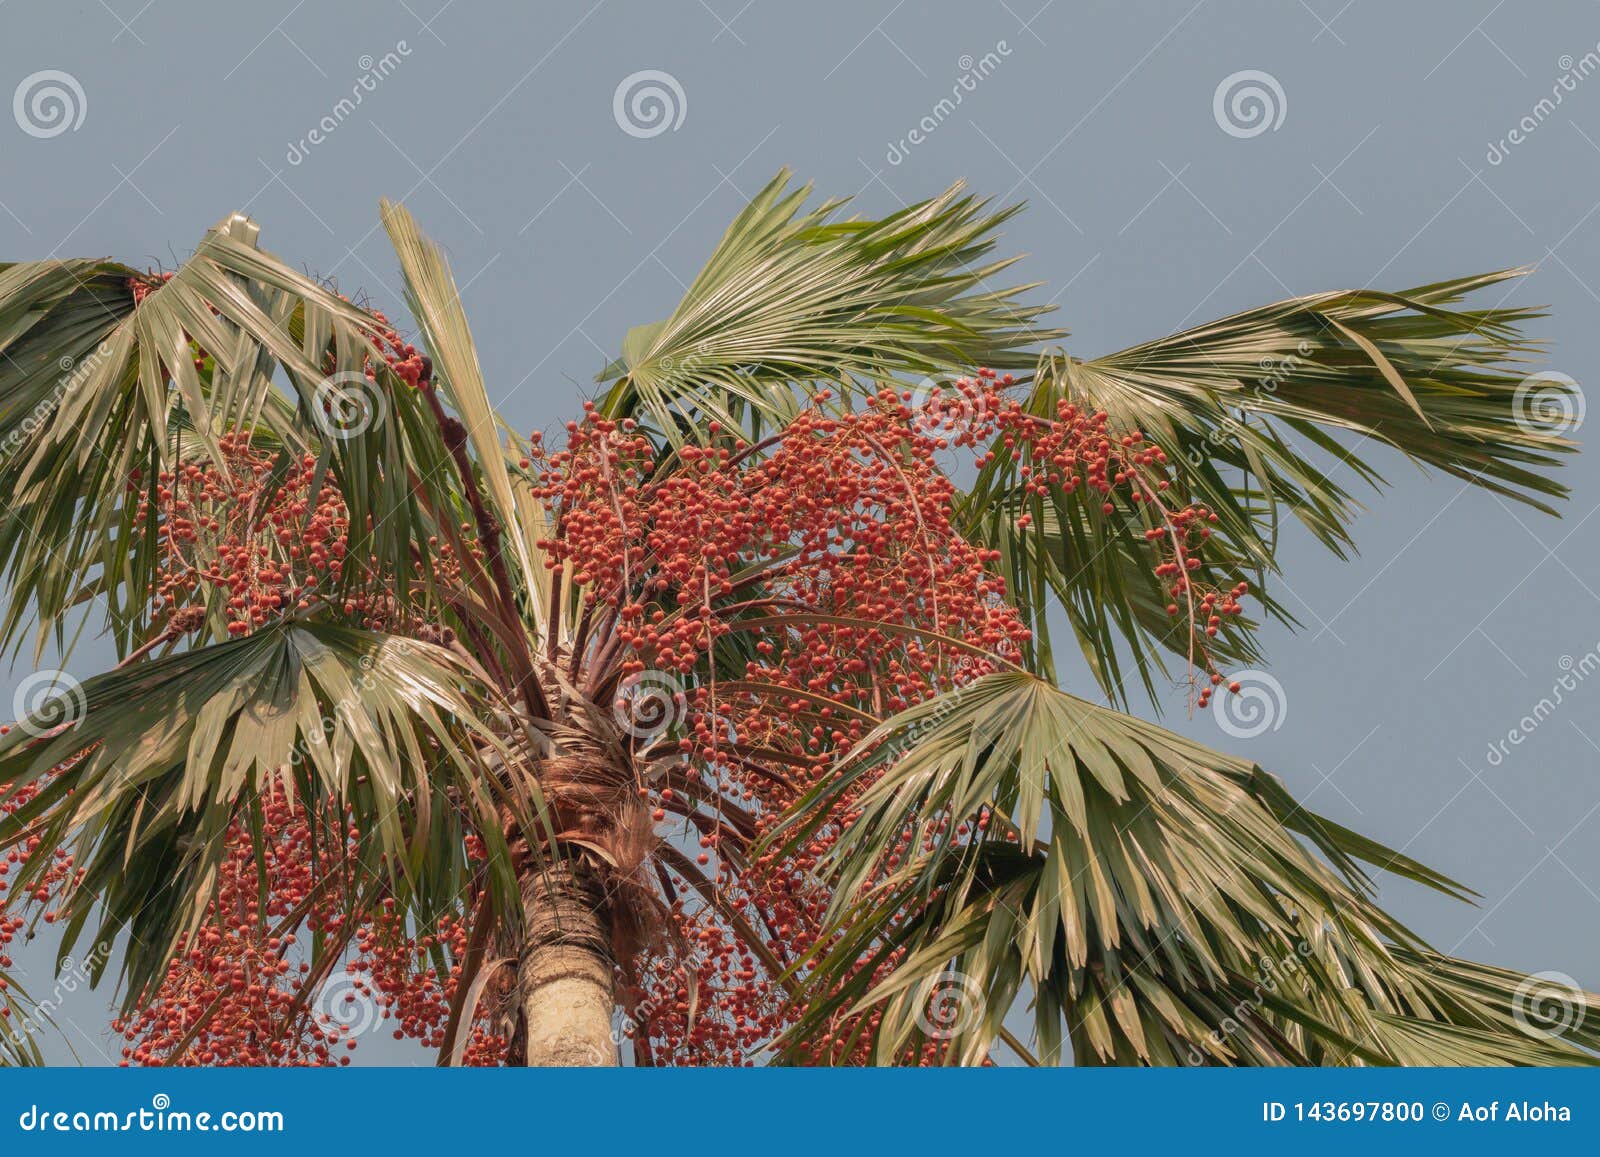 Areca catechu or betel nut is colorful in a garden.common names including the areca palm, areca nut palm, betel palm, Indian nut.